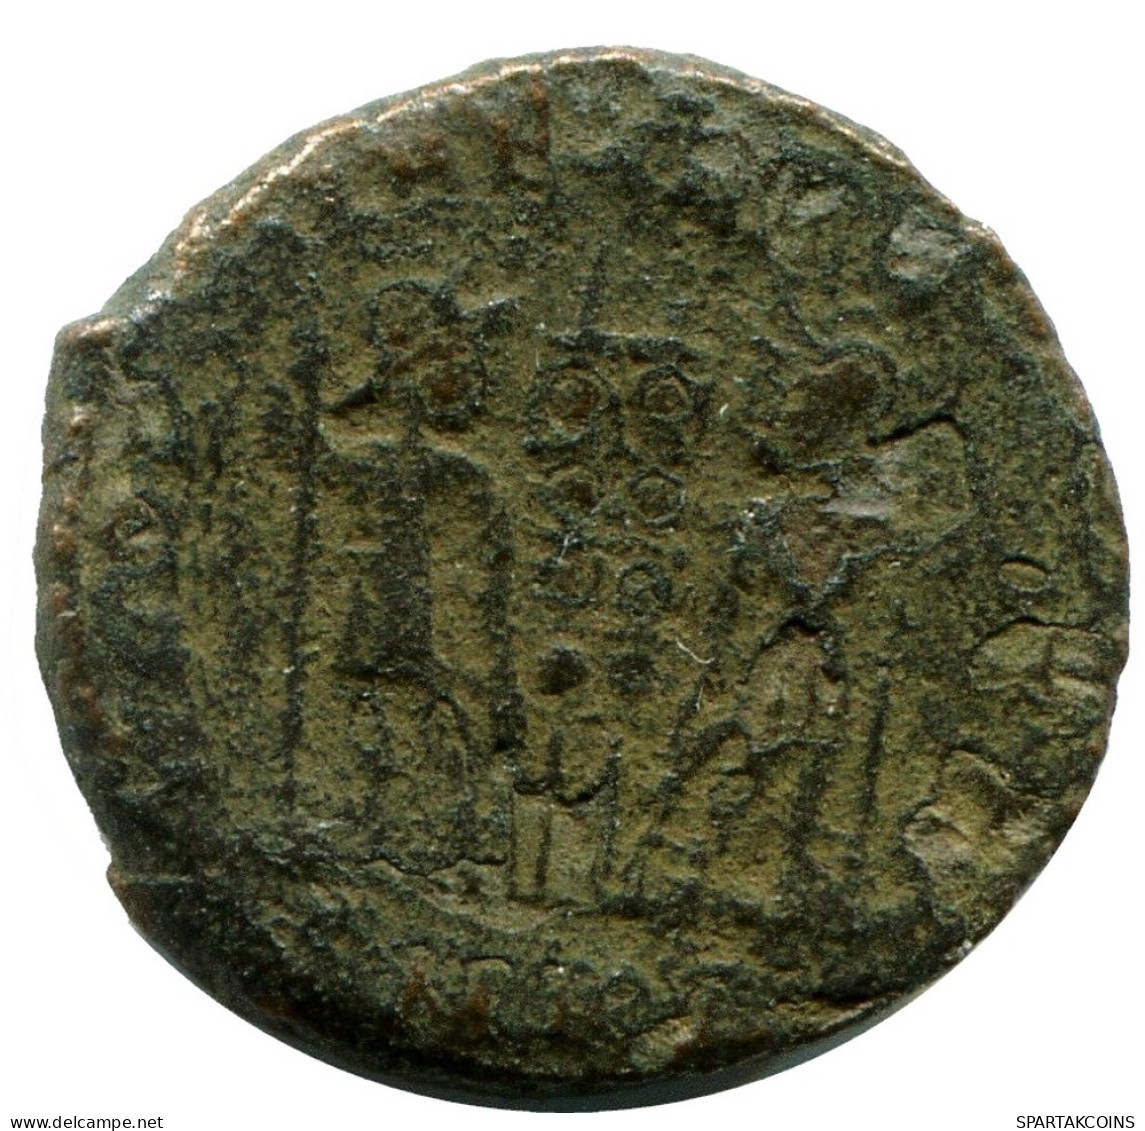 CONSTANTINE I MINTED IN CYZICUS FOUND IN IHNASYAH HOARD EGYPT #ANC11003.14.F.A - The Christian Empire (307 AD To 363 AD)